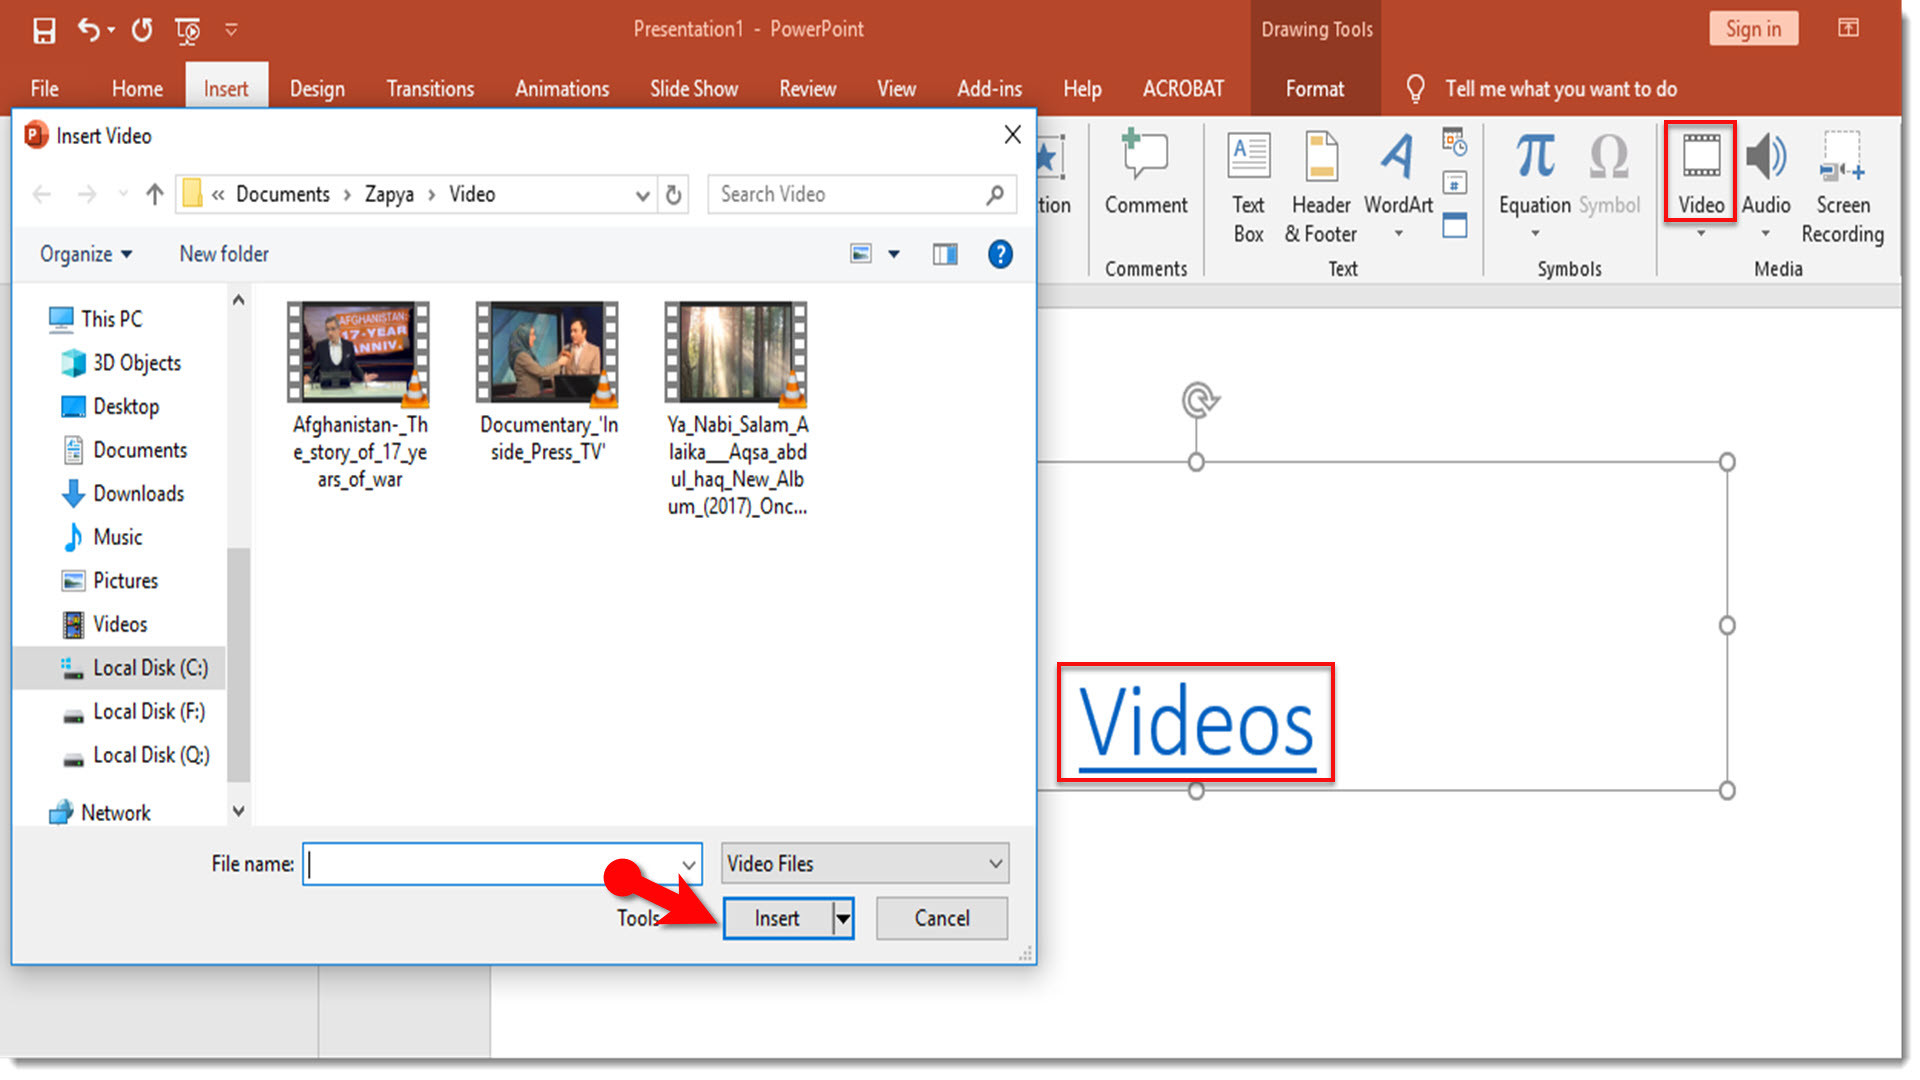 How to Reduce PowerPoint File Size?